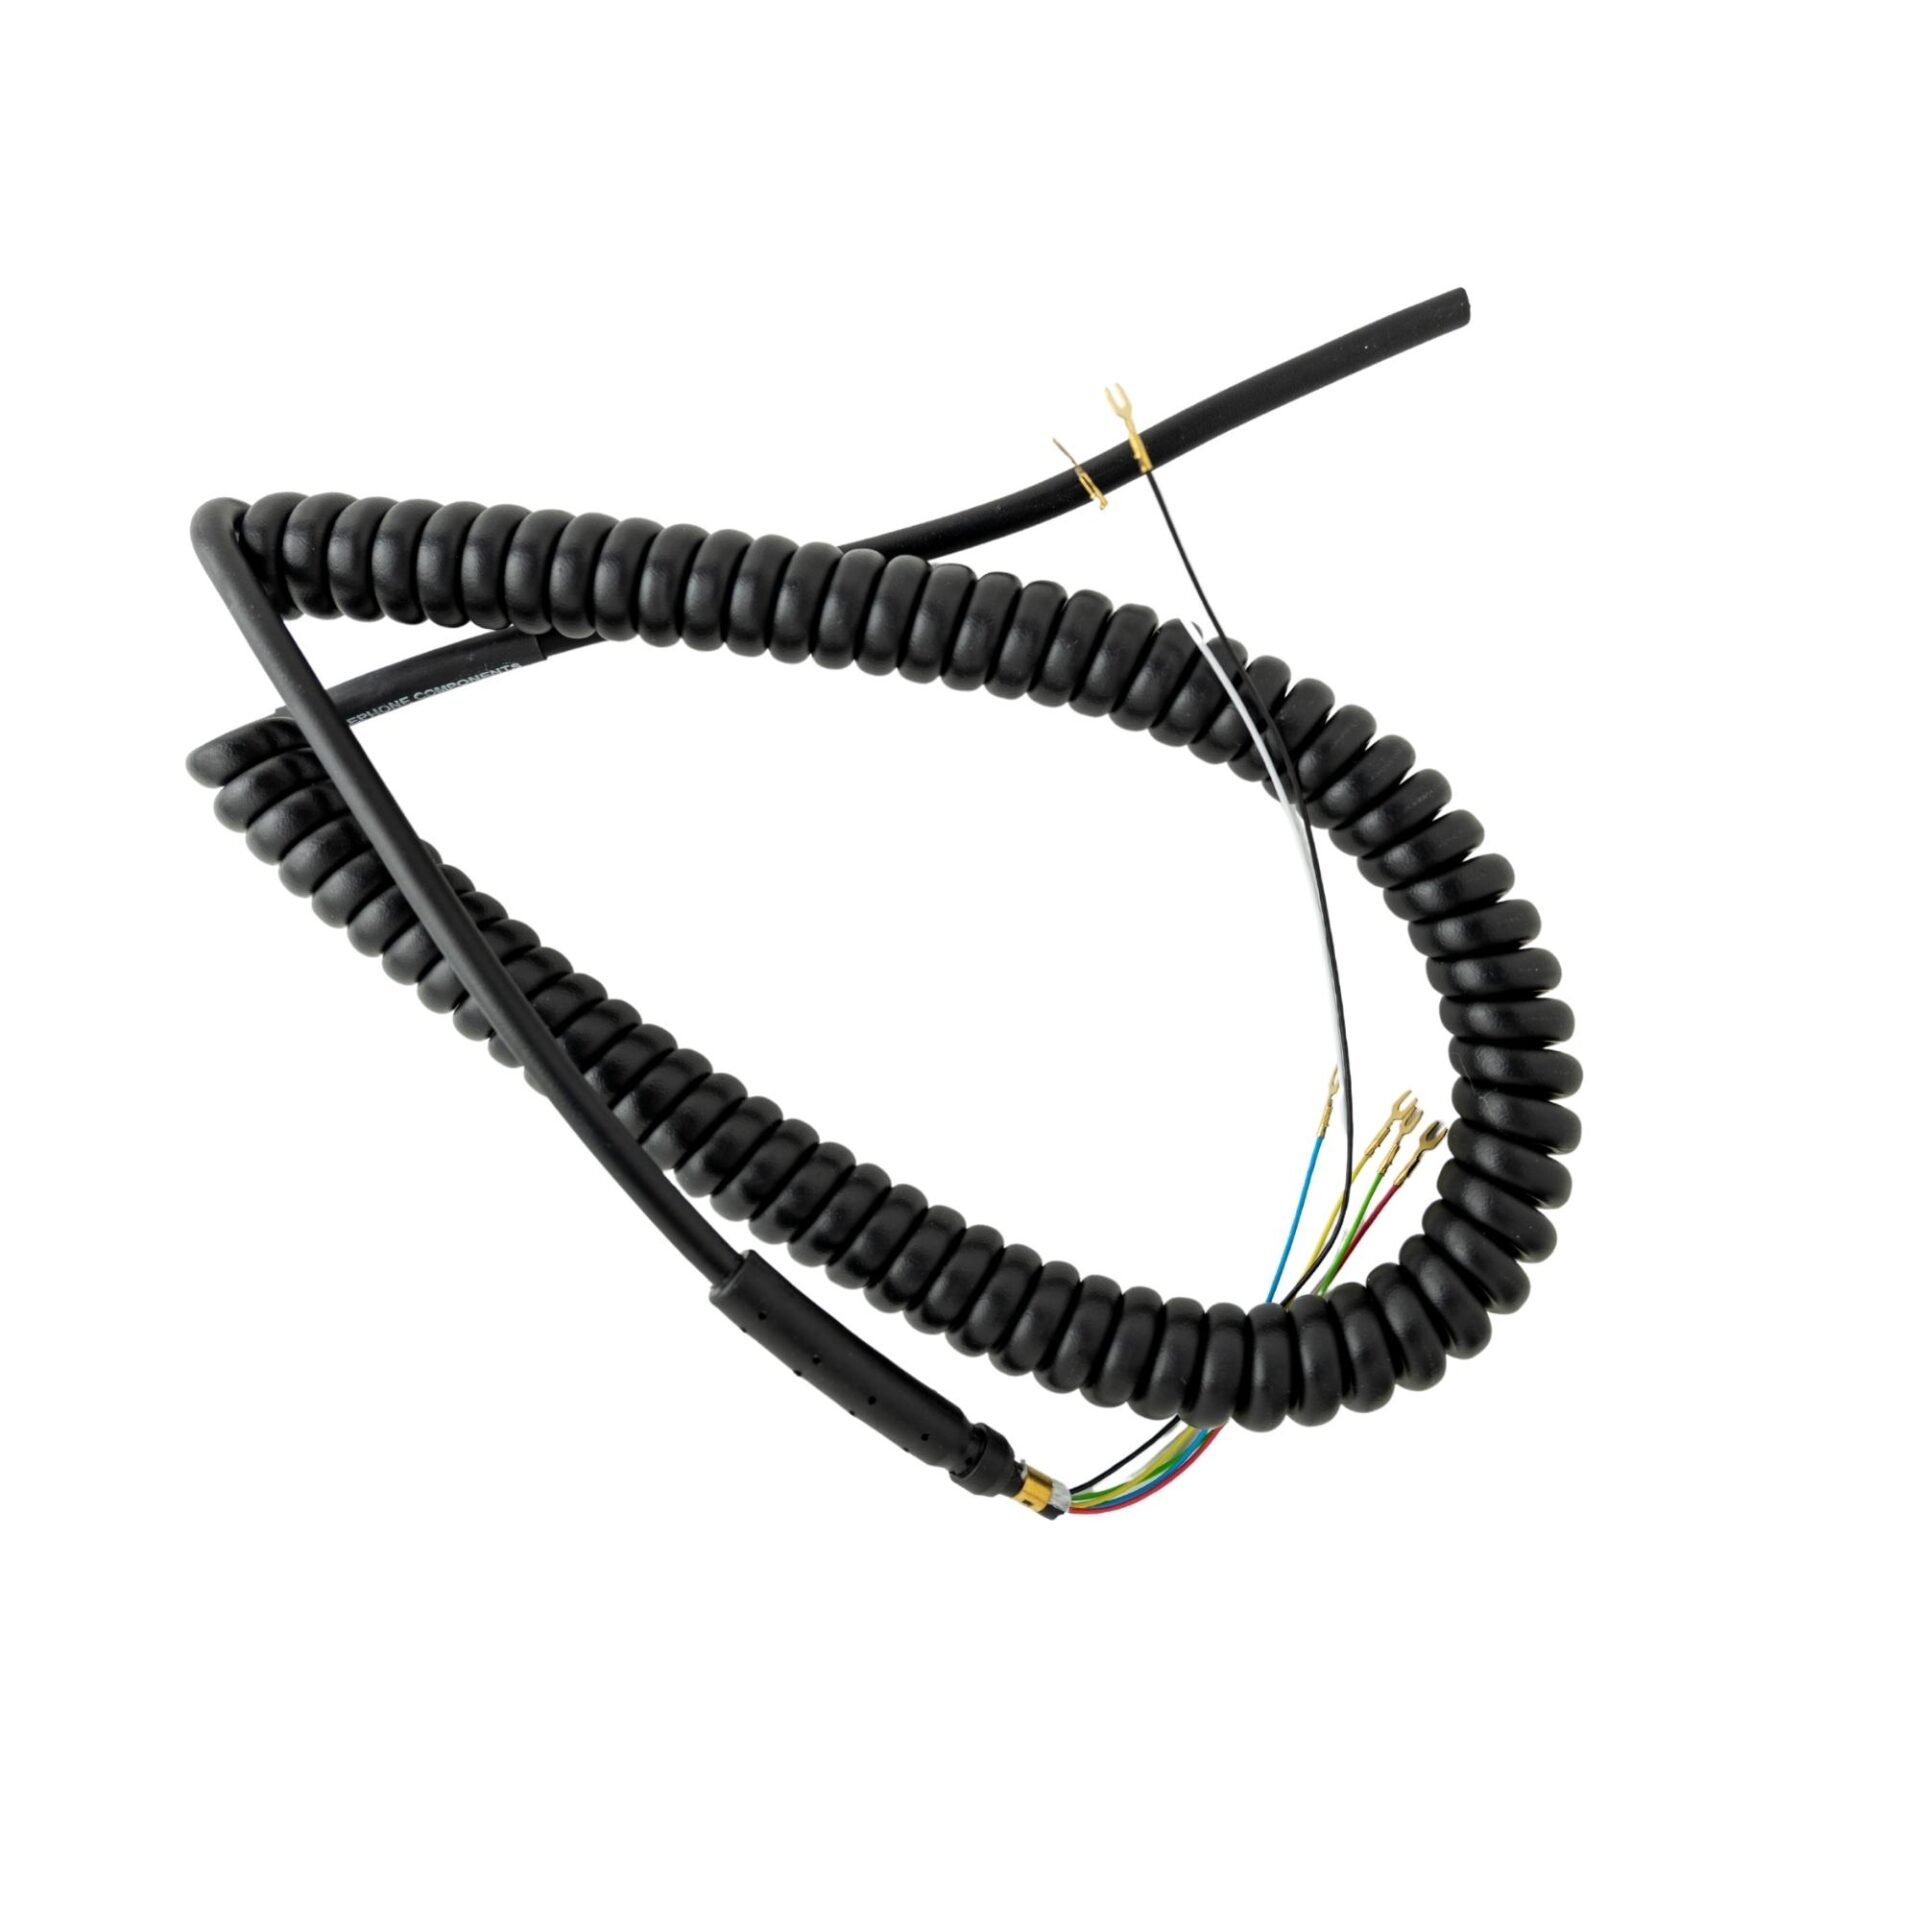 Heavy Duty Coil Cord in Black on a White Background